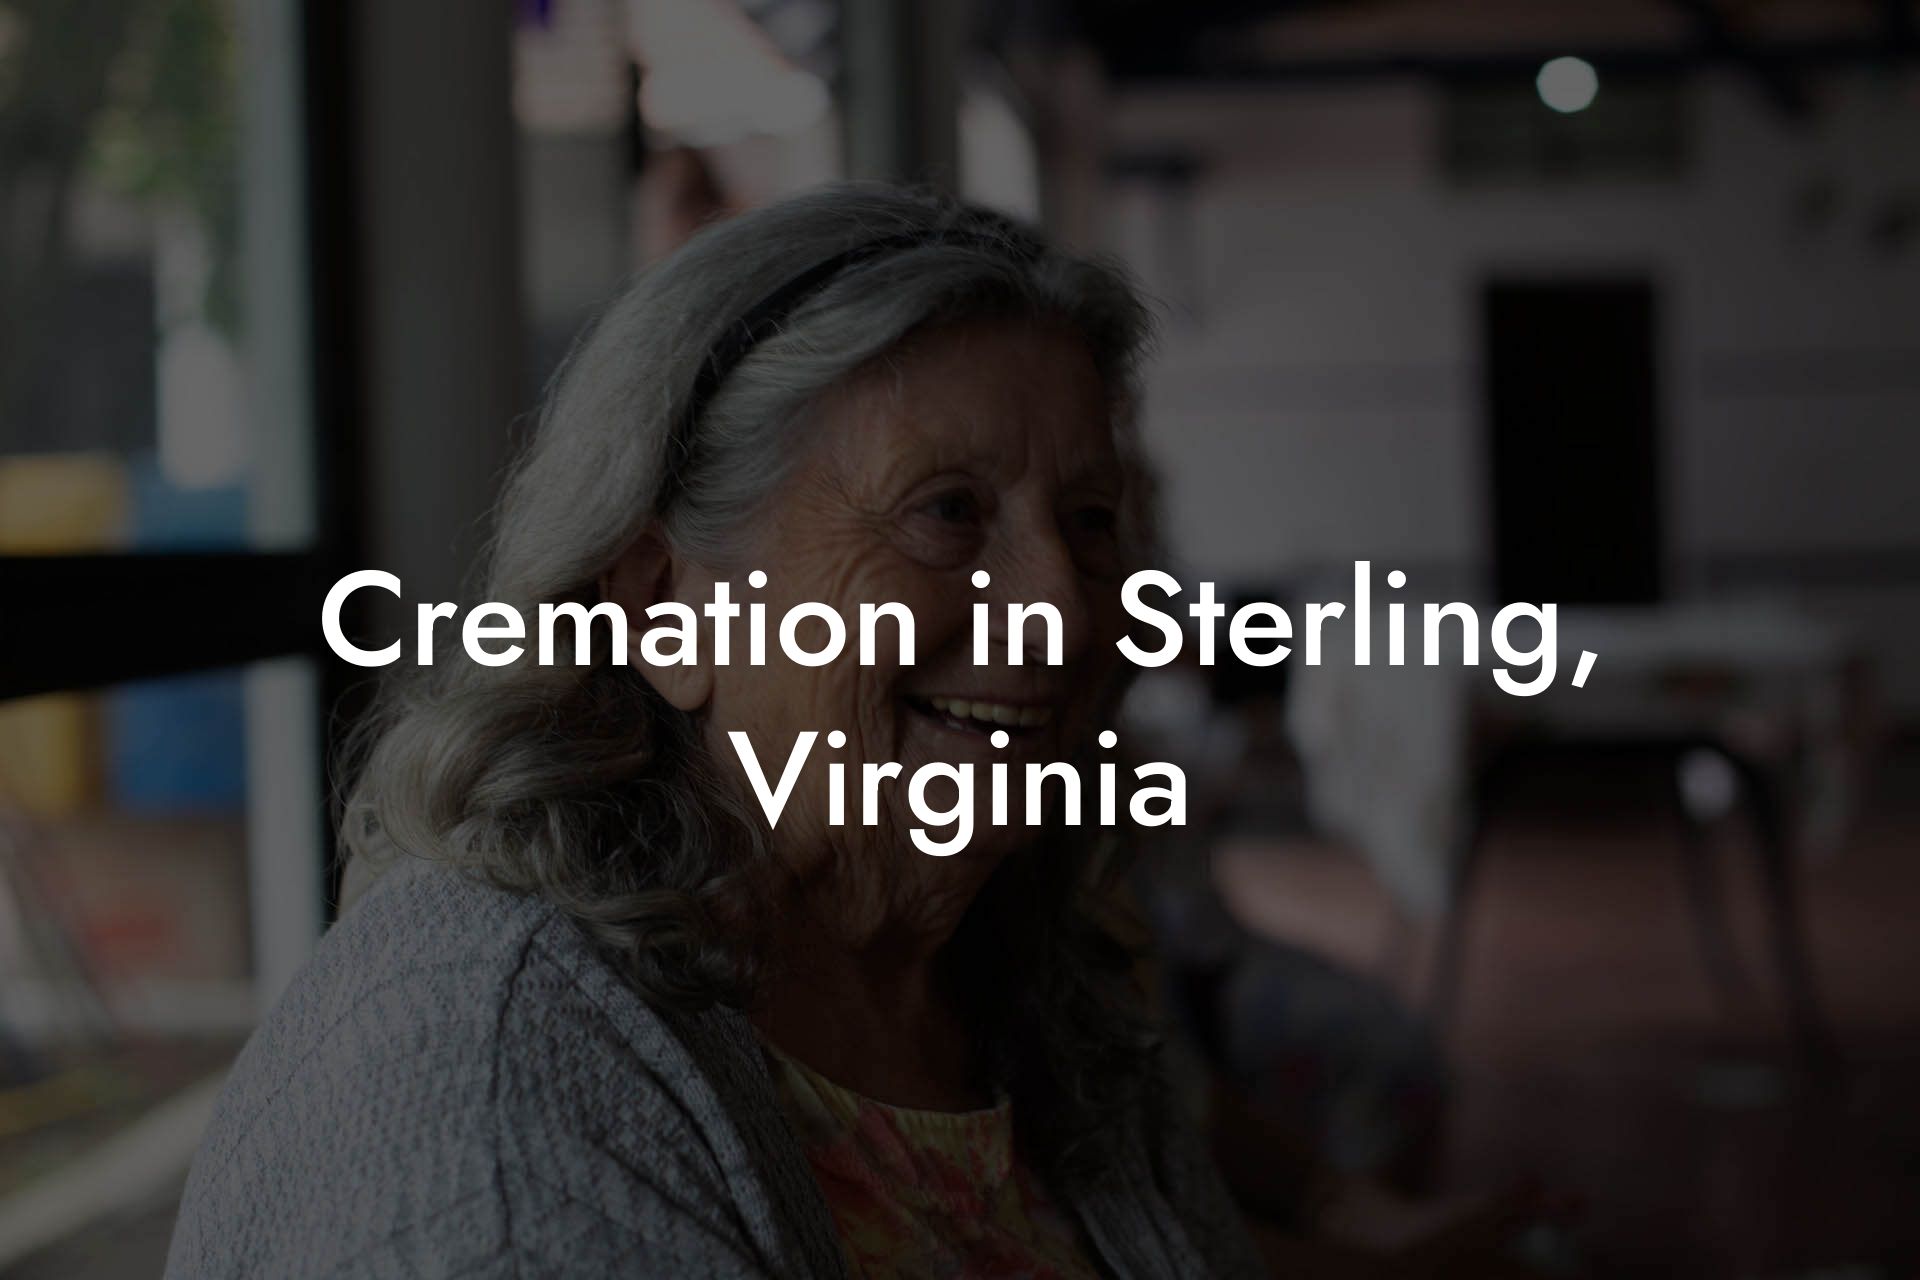 Cremation in Sterling, Virginia